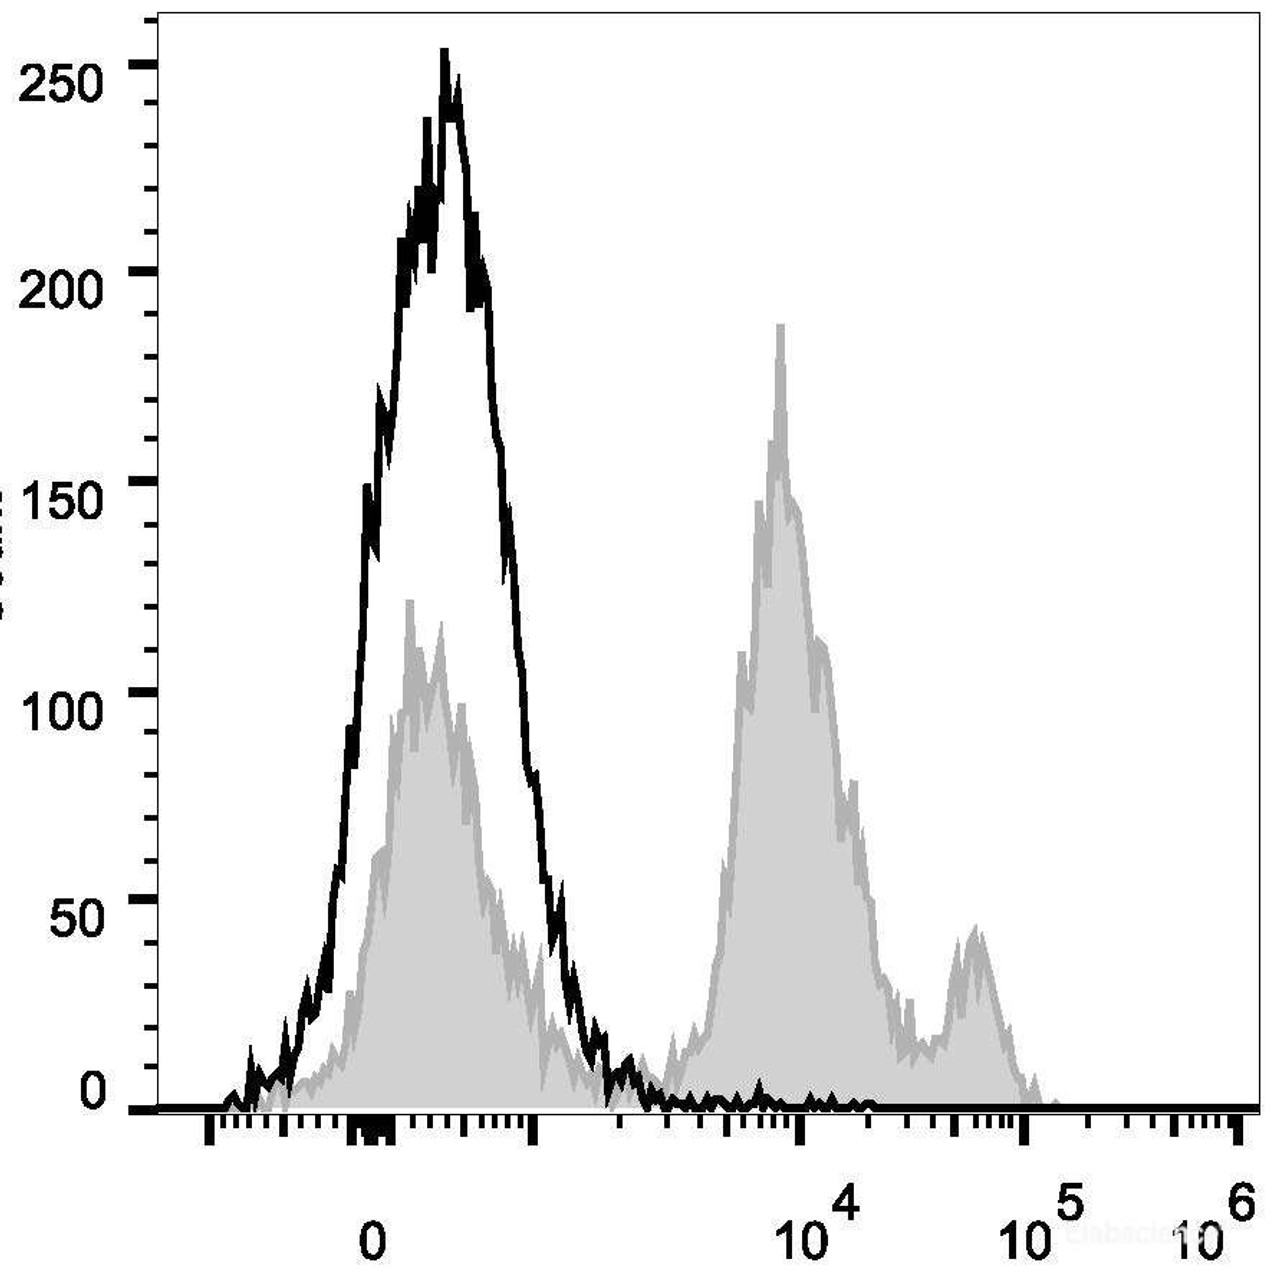 C57BL/6 murine bone marrow cells are stained with PercP Anti-Mouse Ly6C Antibody(filled gray histogram). Unstained bone marrow cells (empty black histogram) are used as control.